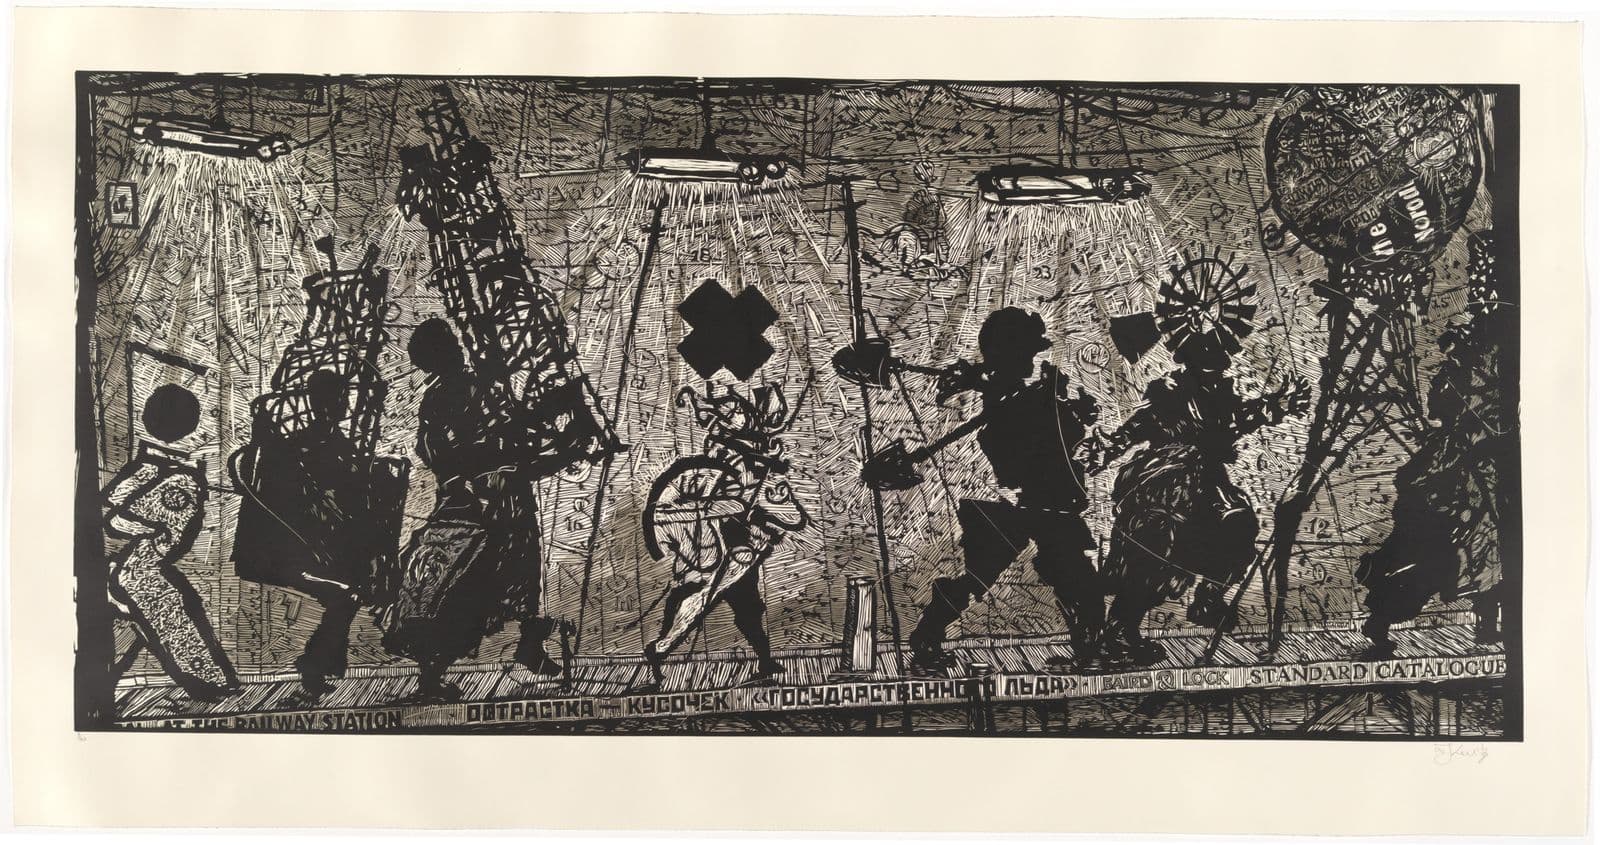 Black and white print of eight figures walking in procession carrying shovels and other equipment in what appears to be a tunnel